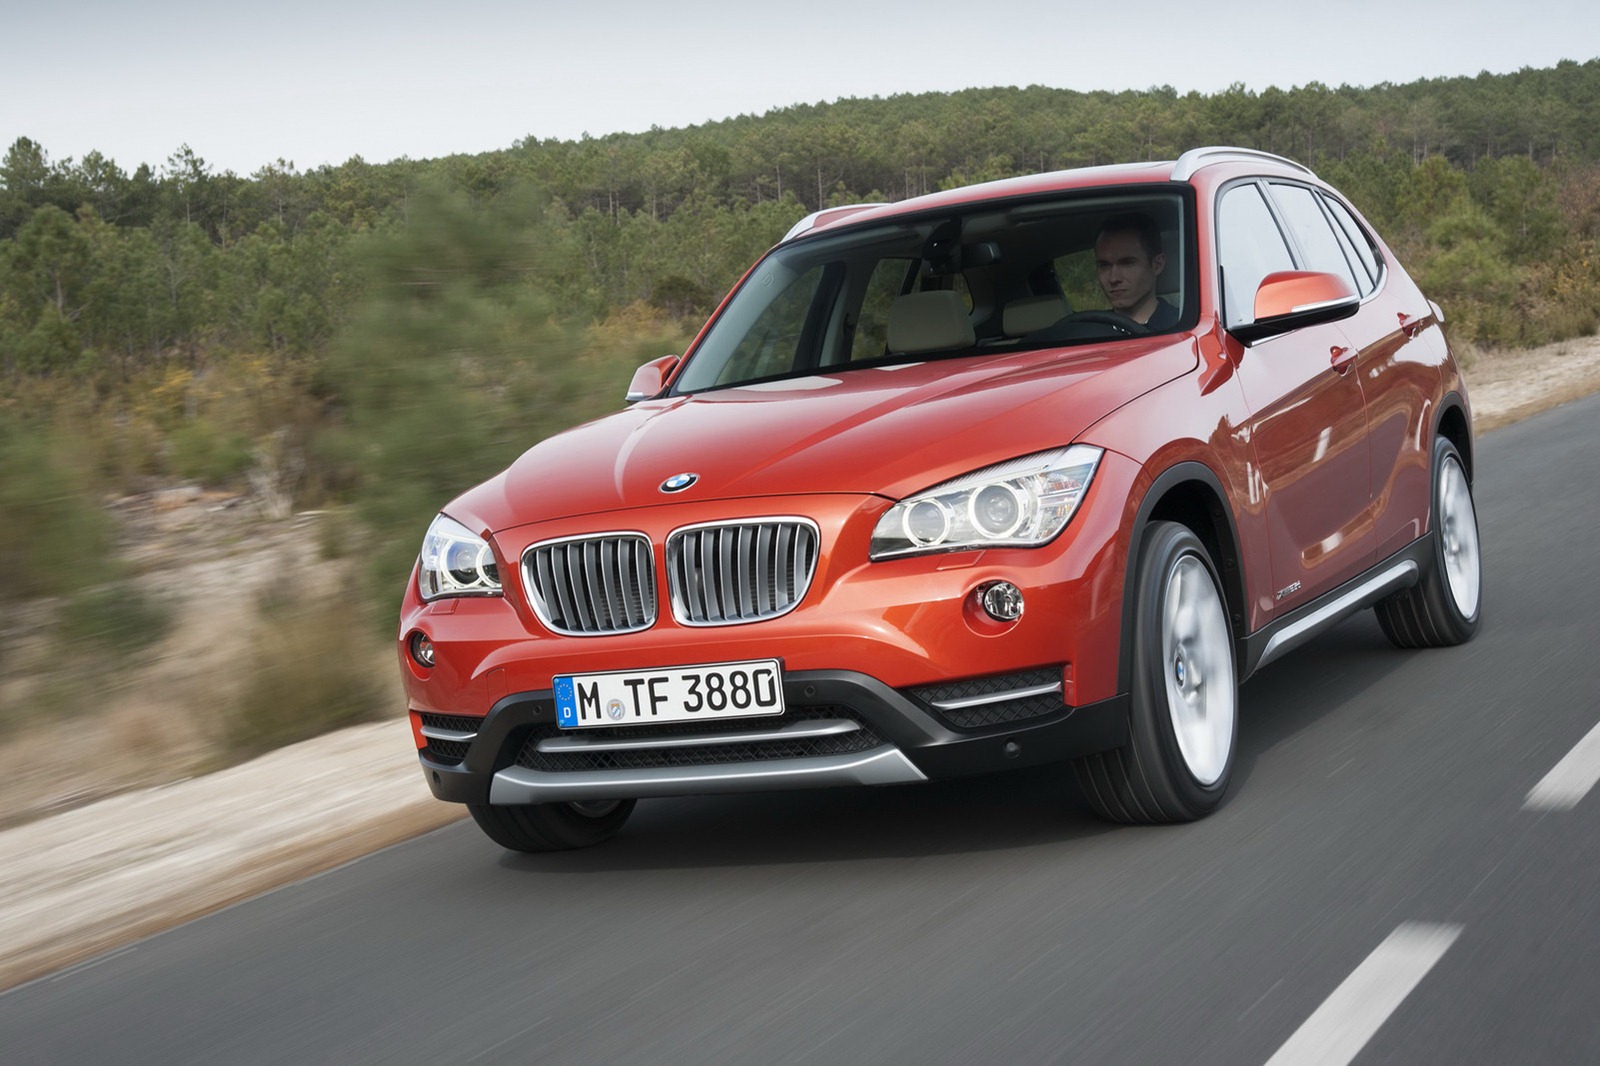 2013 BMW X1 facelift details and gallery